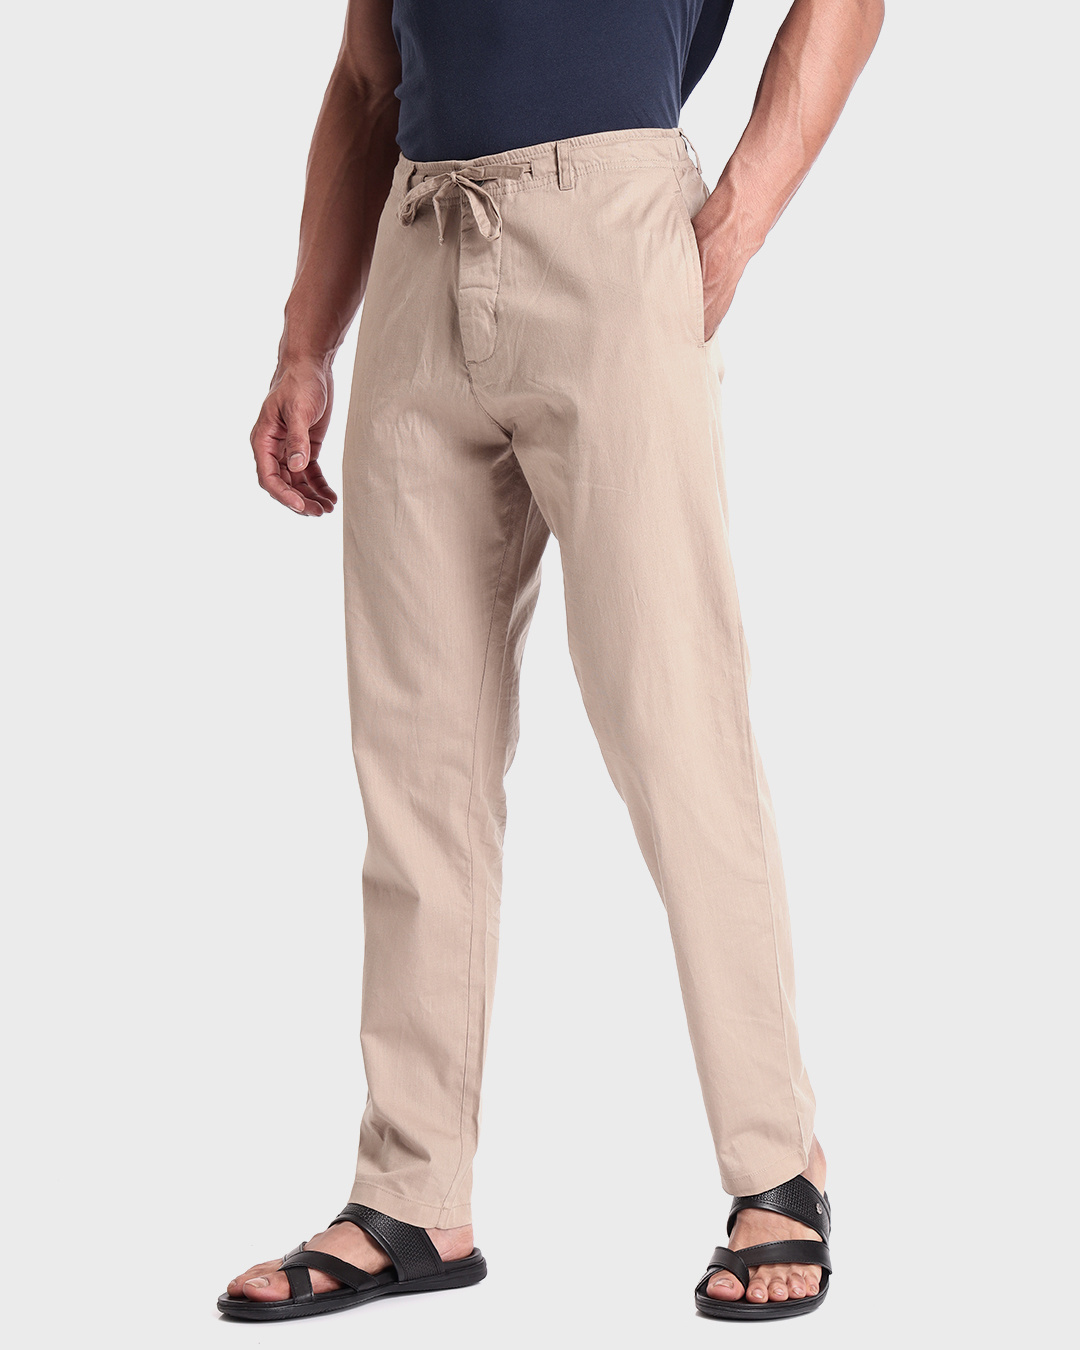 Mens Casual Slim Straight Fit Broken Twill Fabric Cotton Trousers